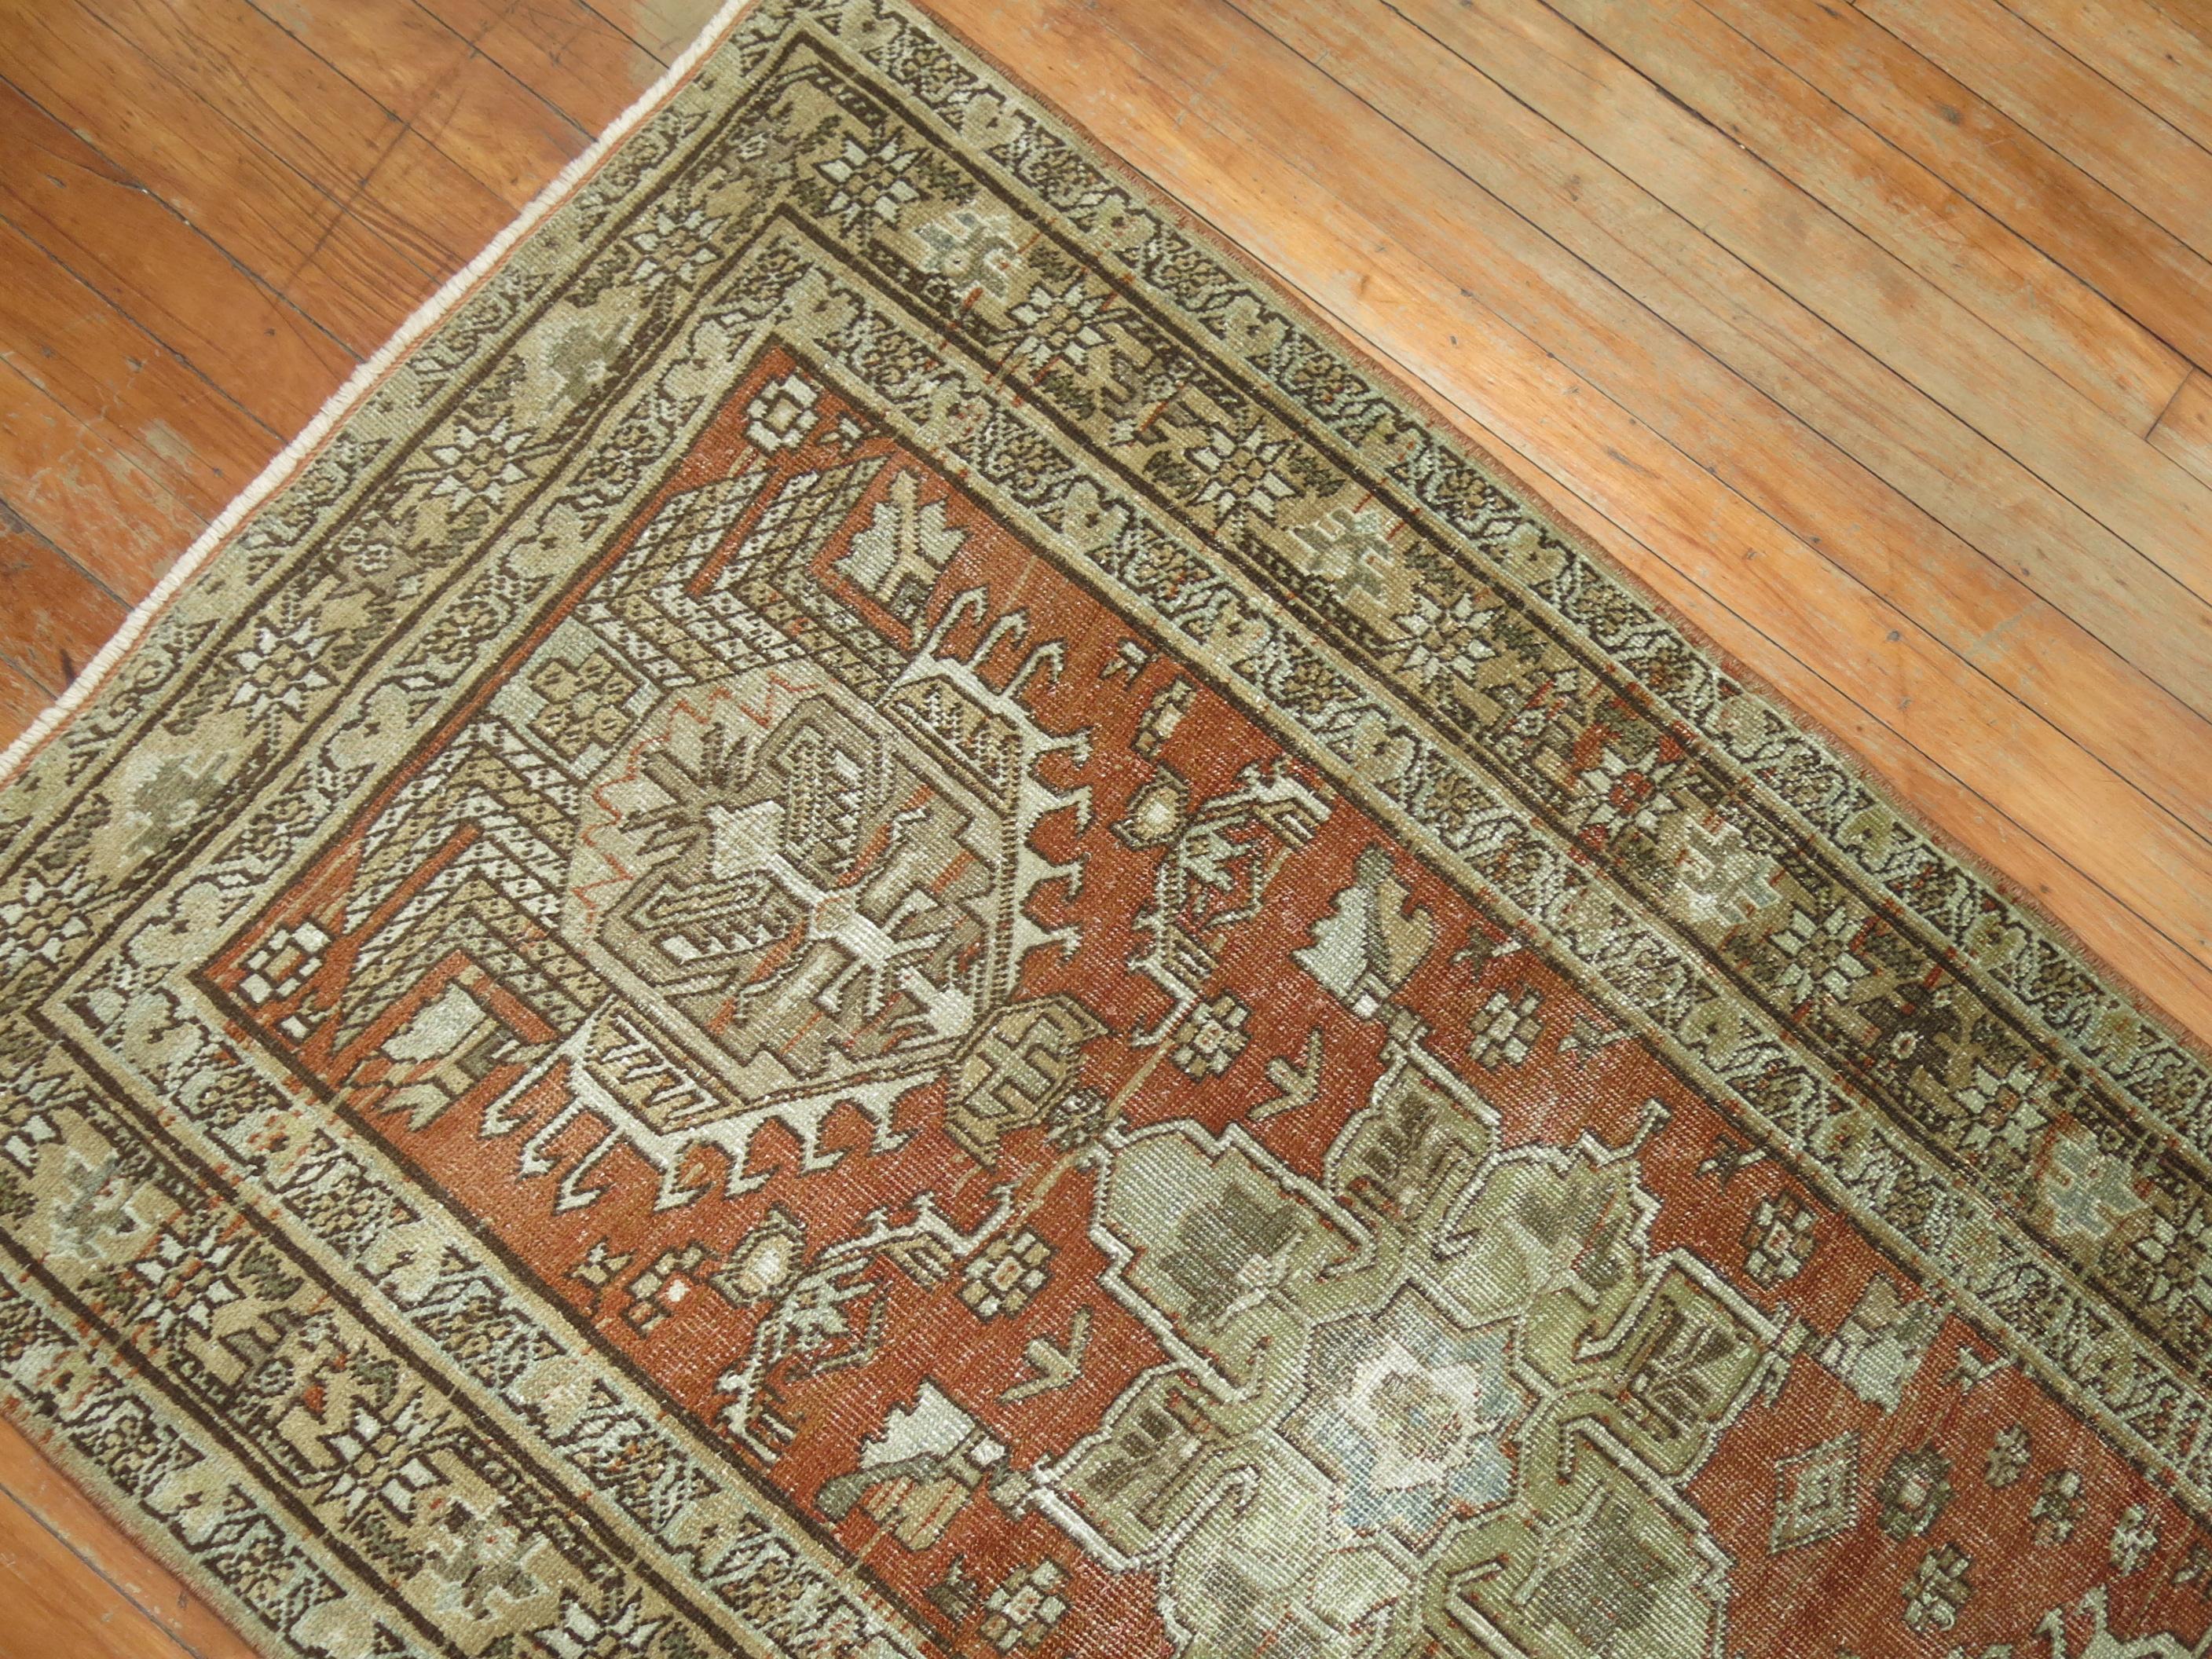 Decorative Persian Heriz one of a kind antique runner from the early 20th century. Large scale medallions hover over a terracotta field, accents in cocoa and green

Measures: 2'9” x 11'5”.